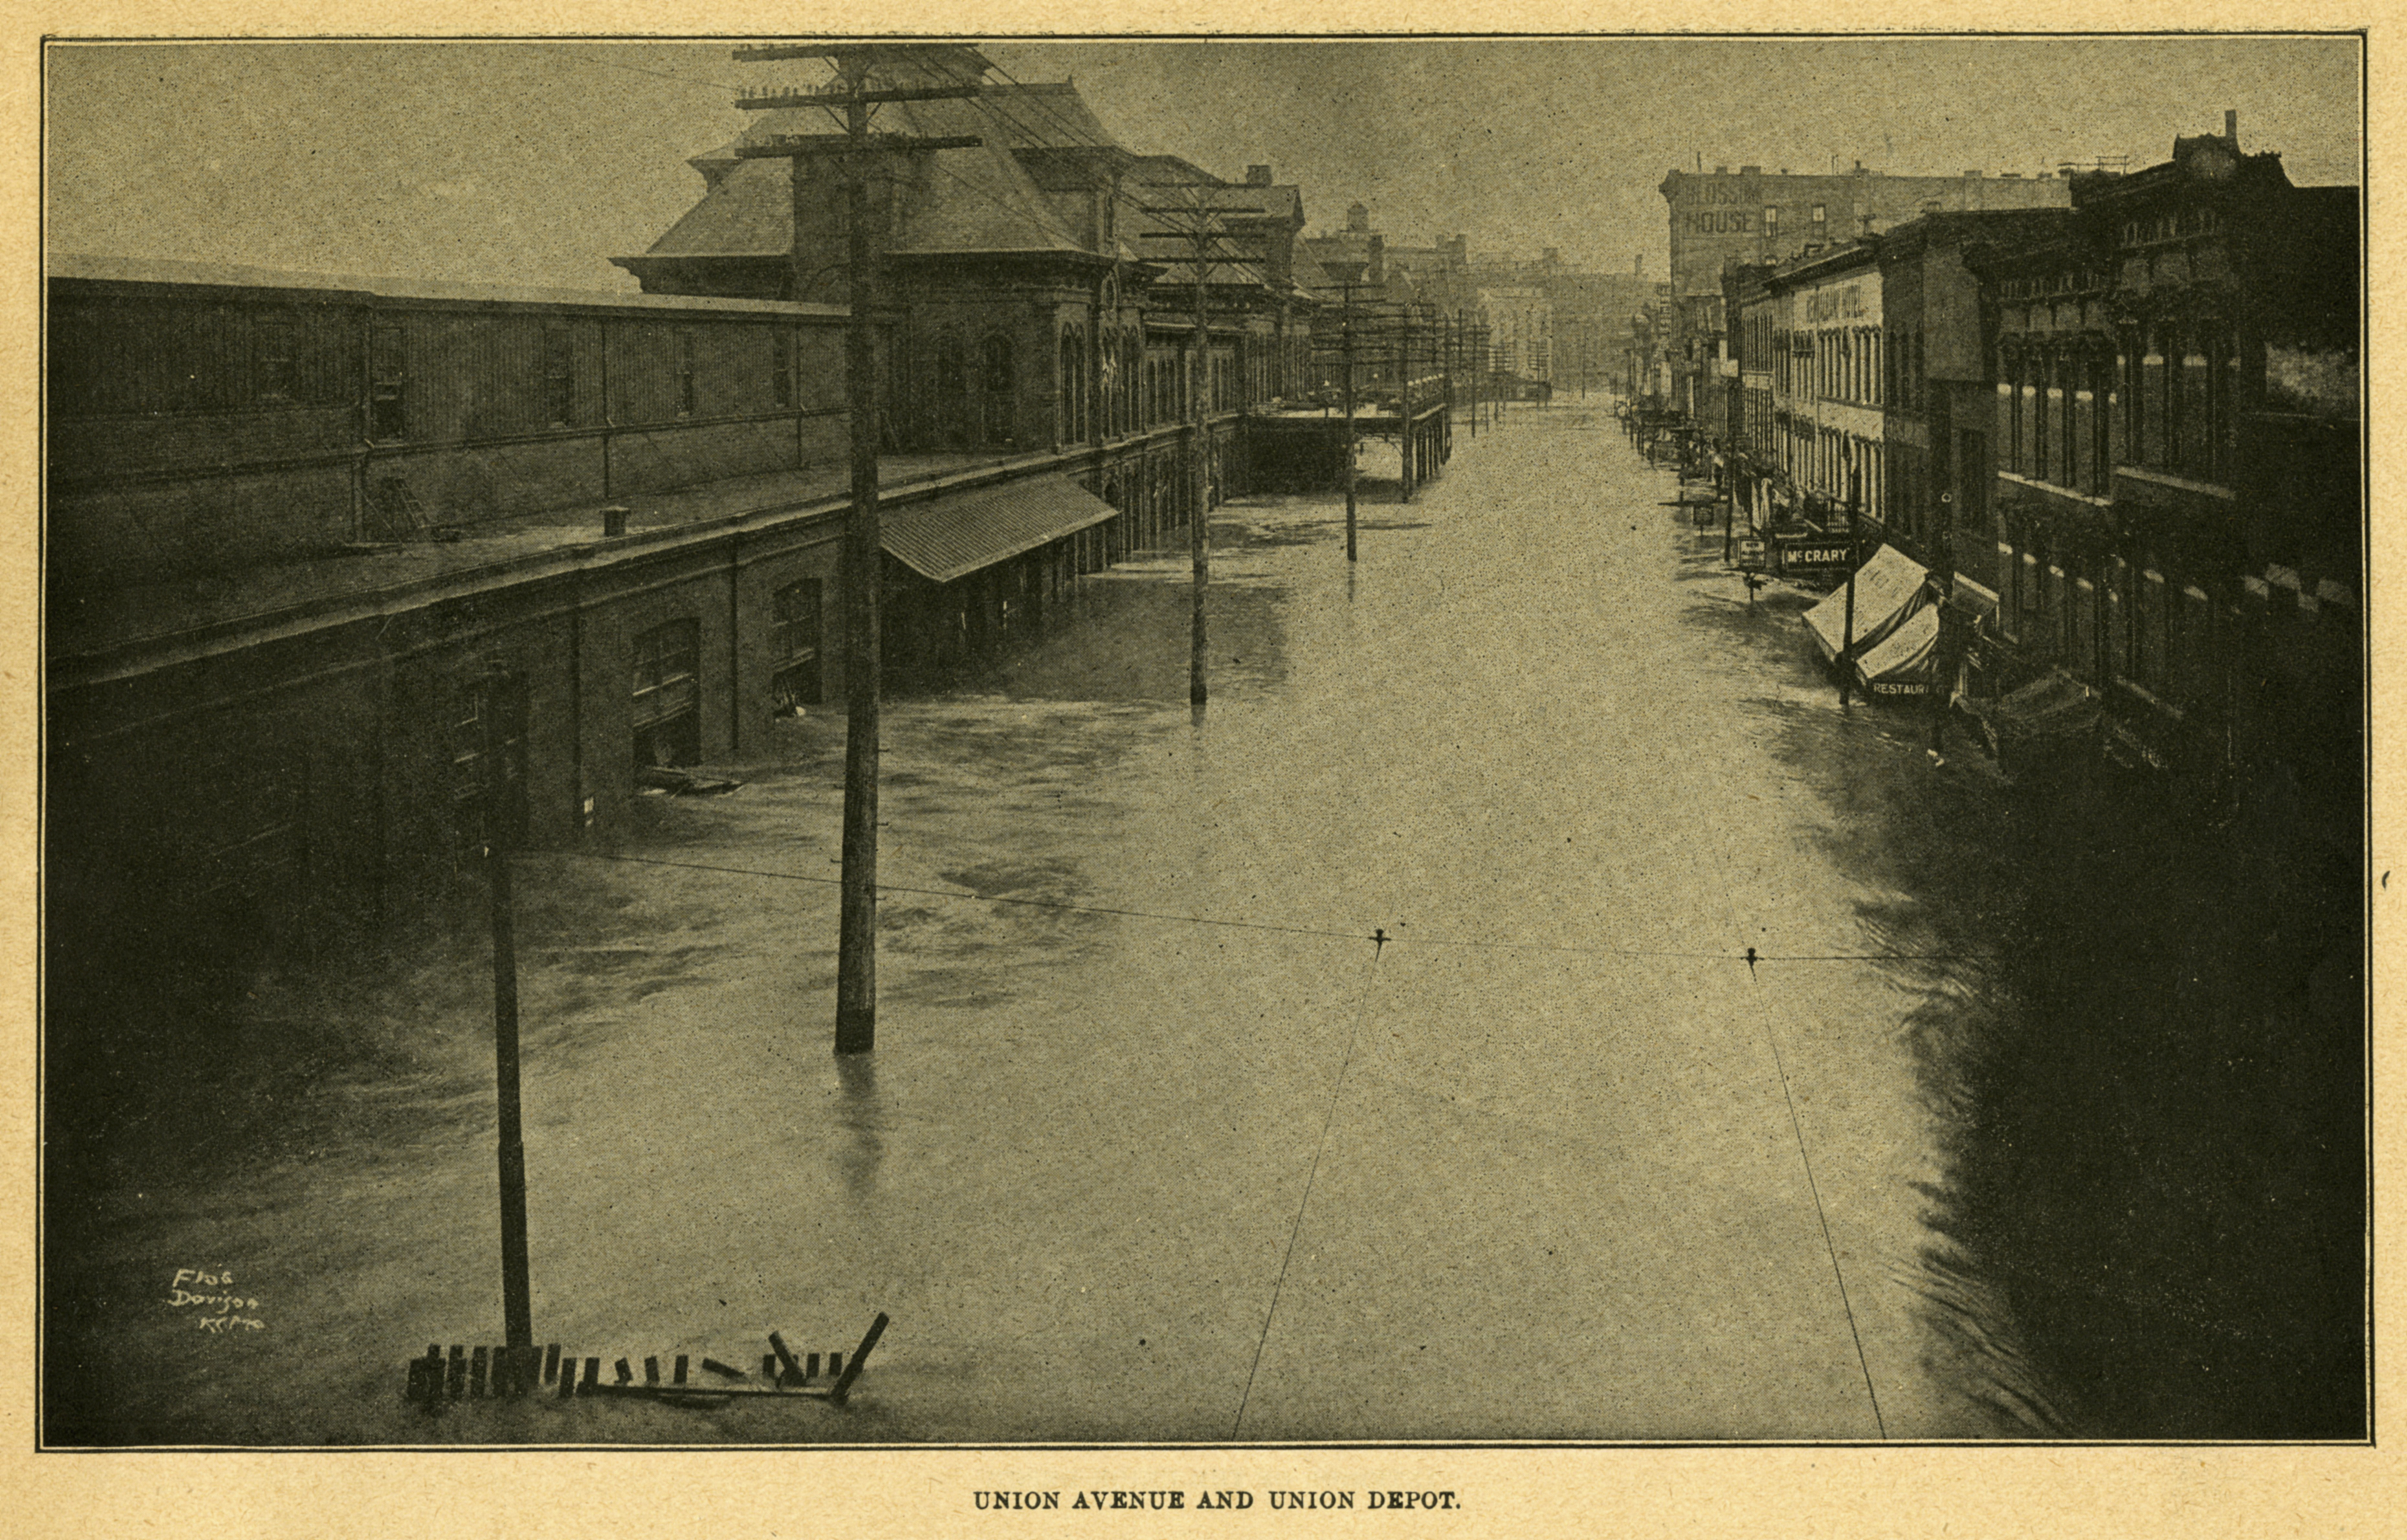 Union Avenue, its businesses, and the depot are overwhelmed by the 1903 Flood.